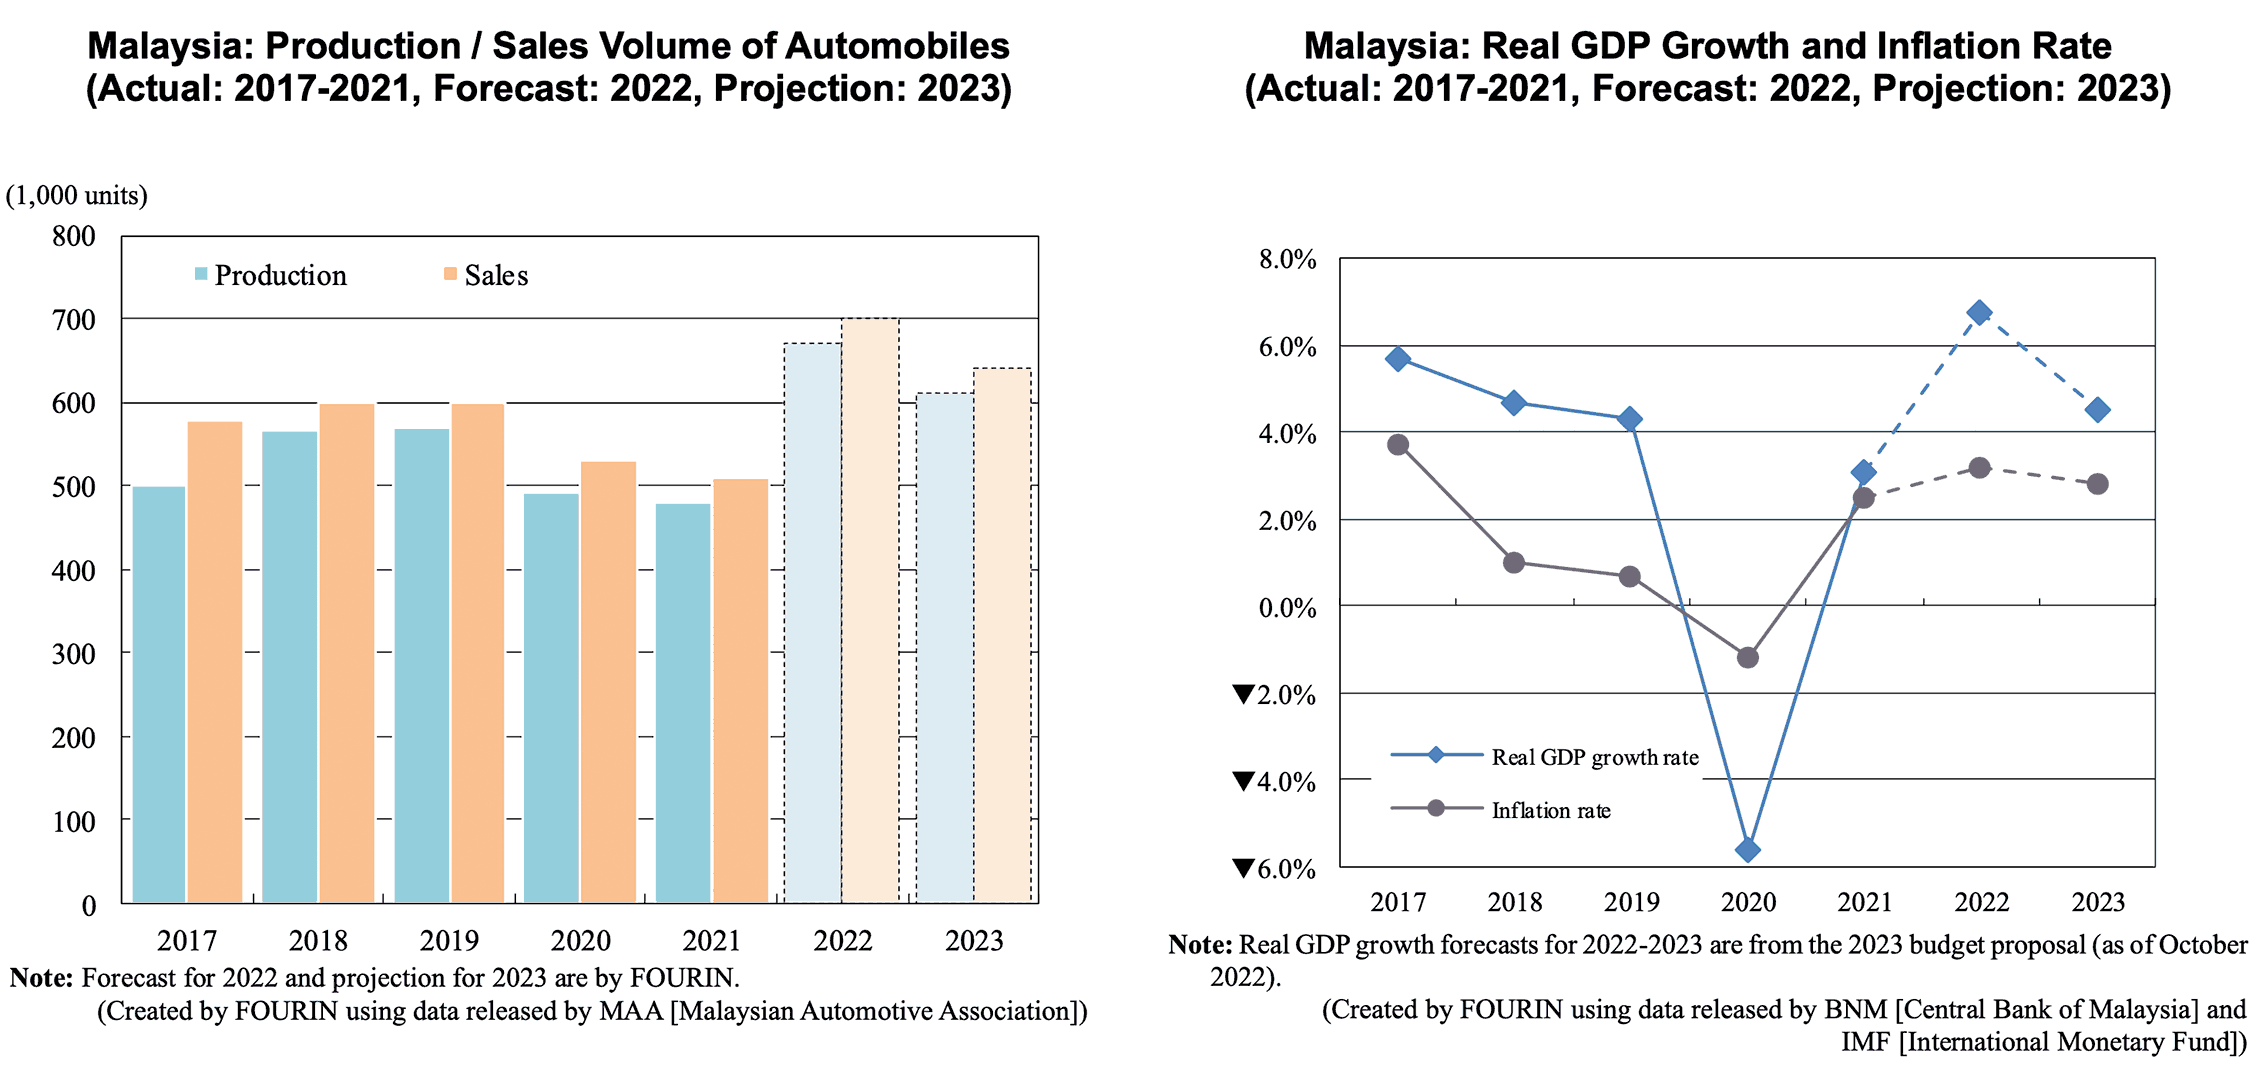 Malaysia graphs: Production / Sales Volume of Automobiles & Real GDP Growth and Inflation Rate